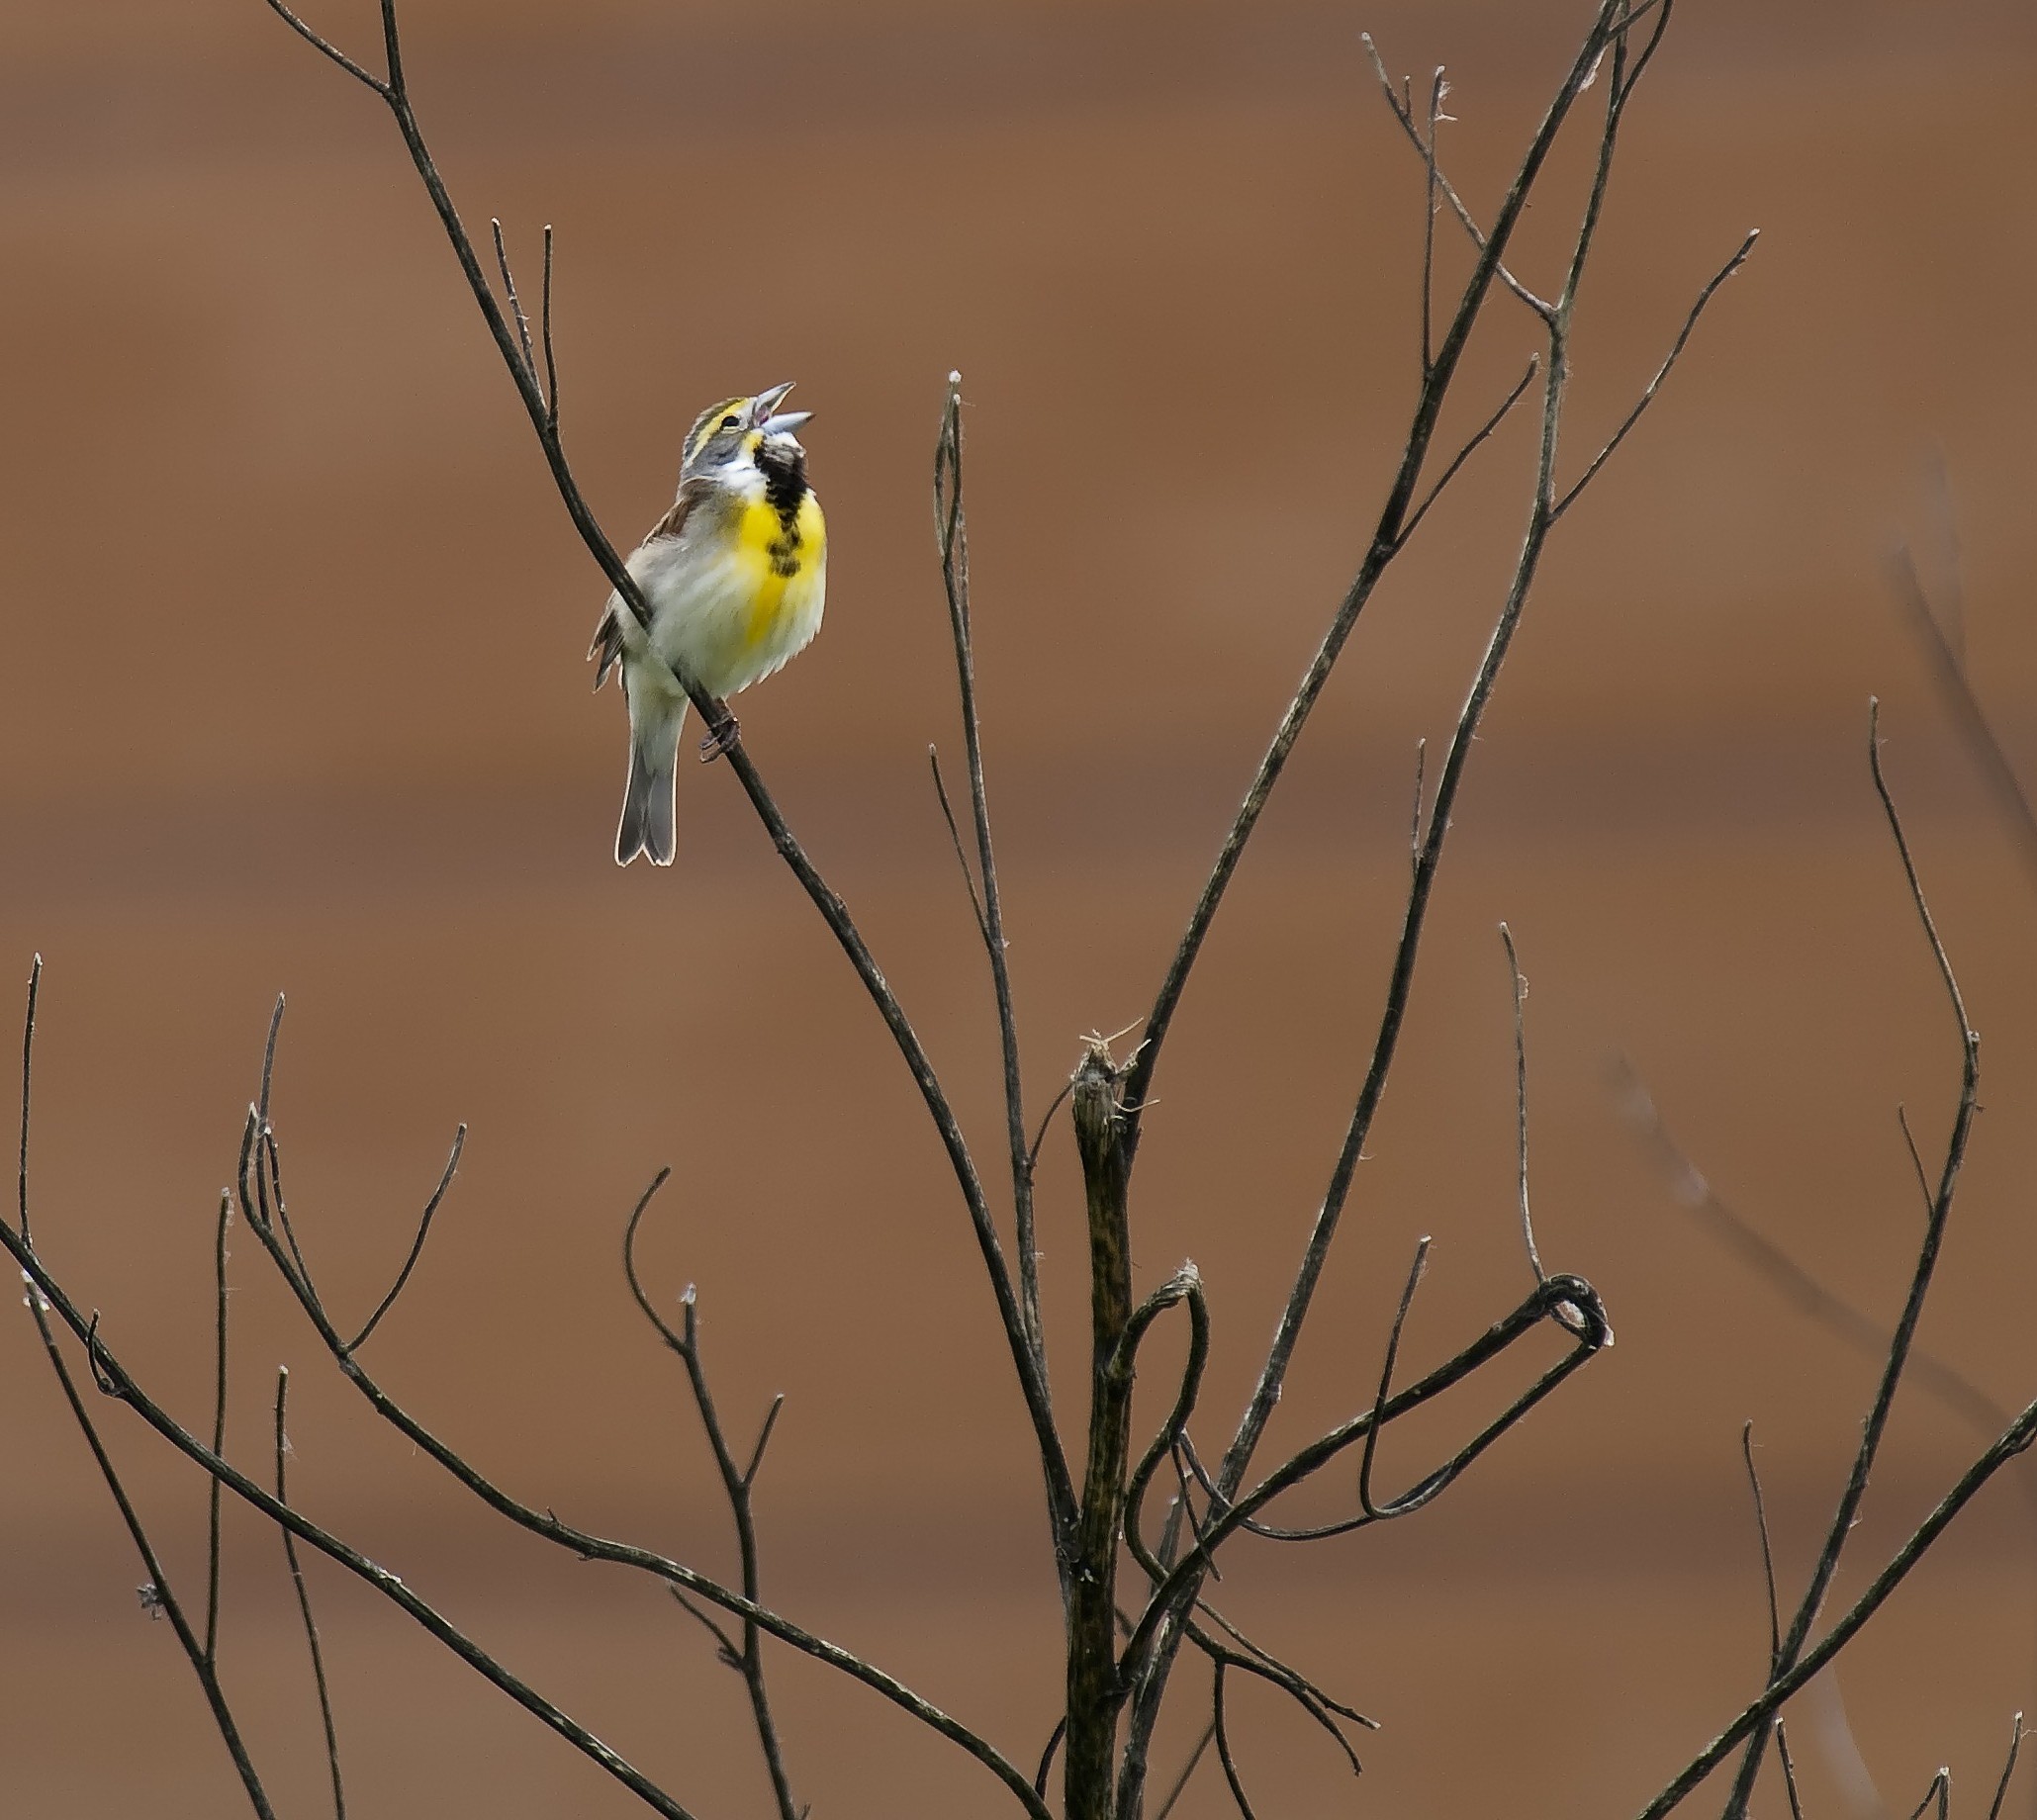 A white, black, and yellow bird sitting on a tree branch with prairie in the background.